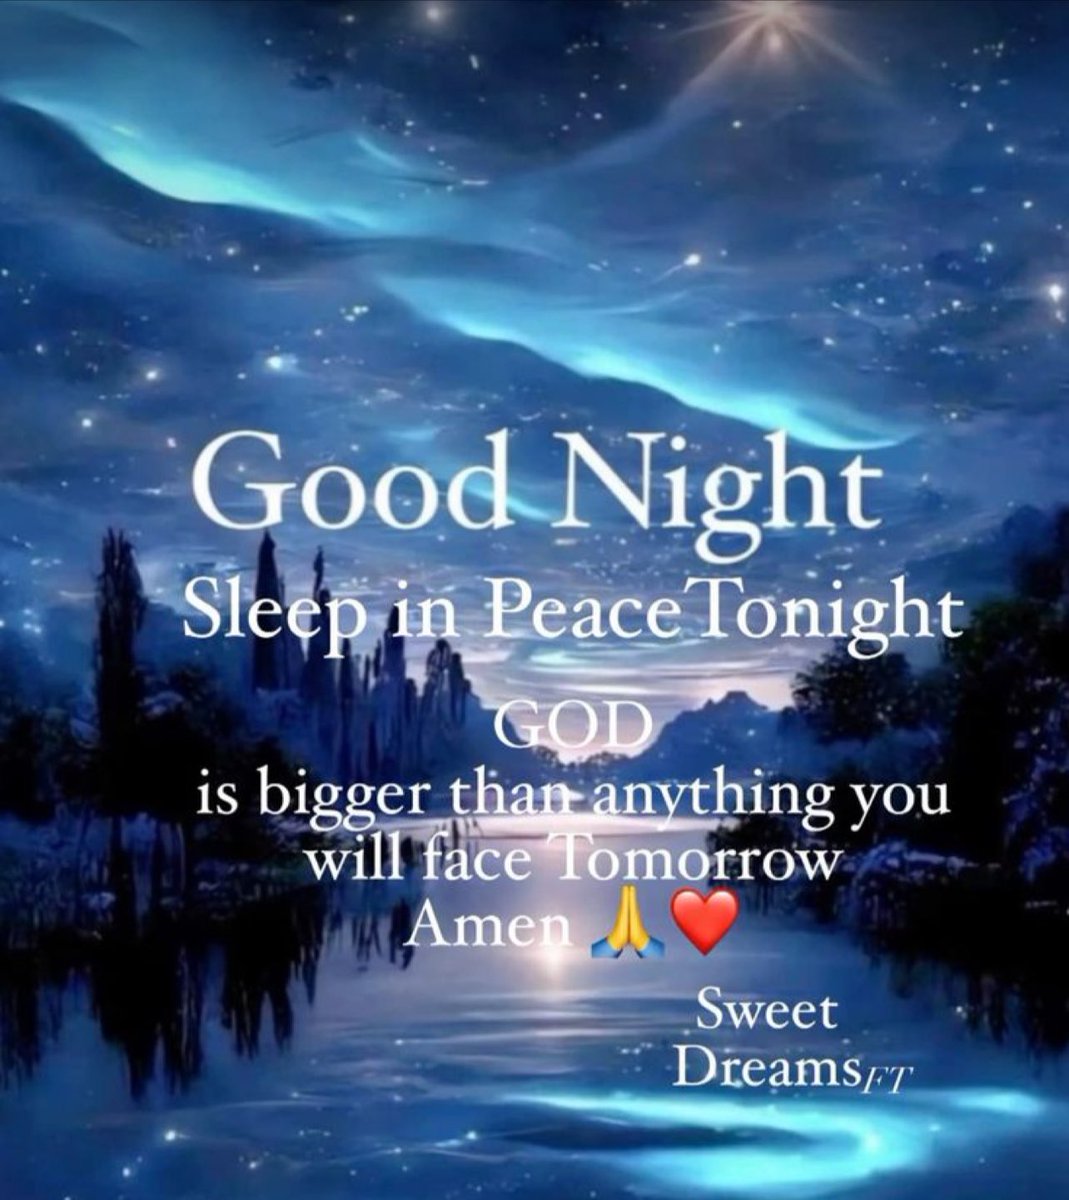 Pleasant dreams family hug your loved ones and tell them how much you love them 🤗❤️😴💤🌙🙏🏼